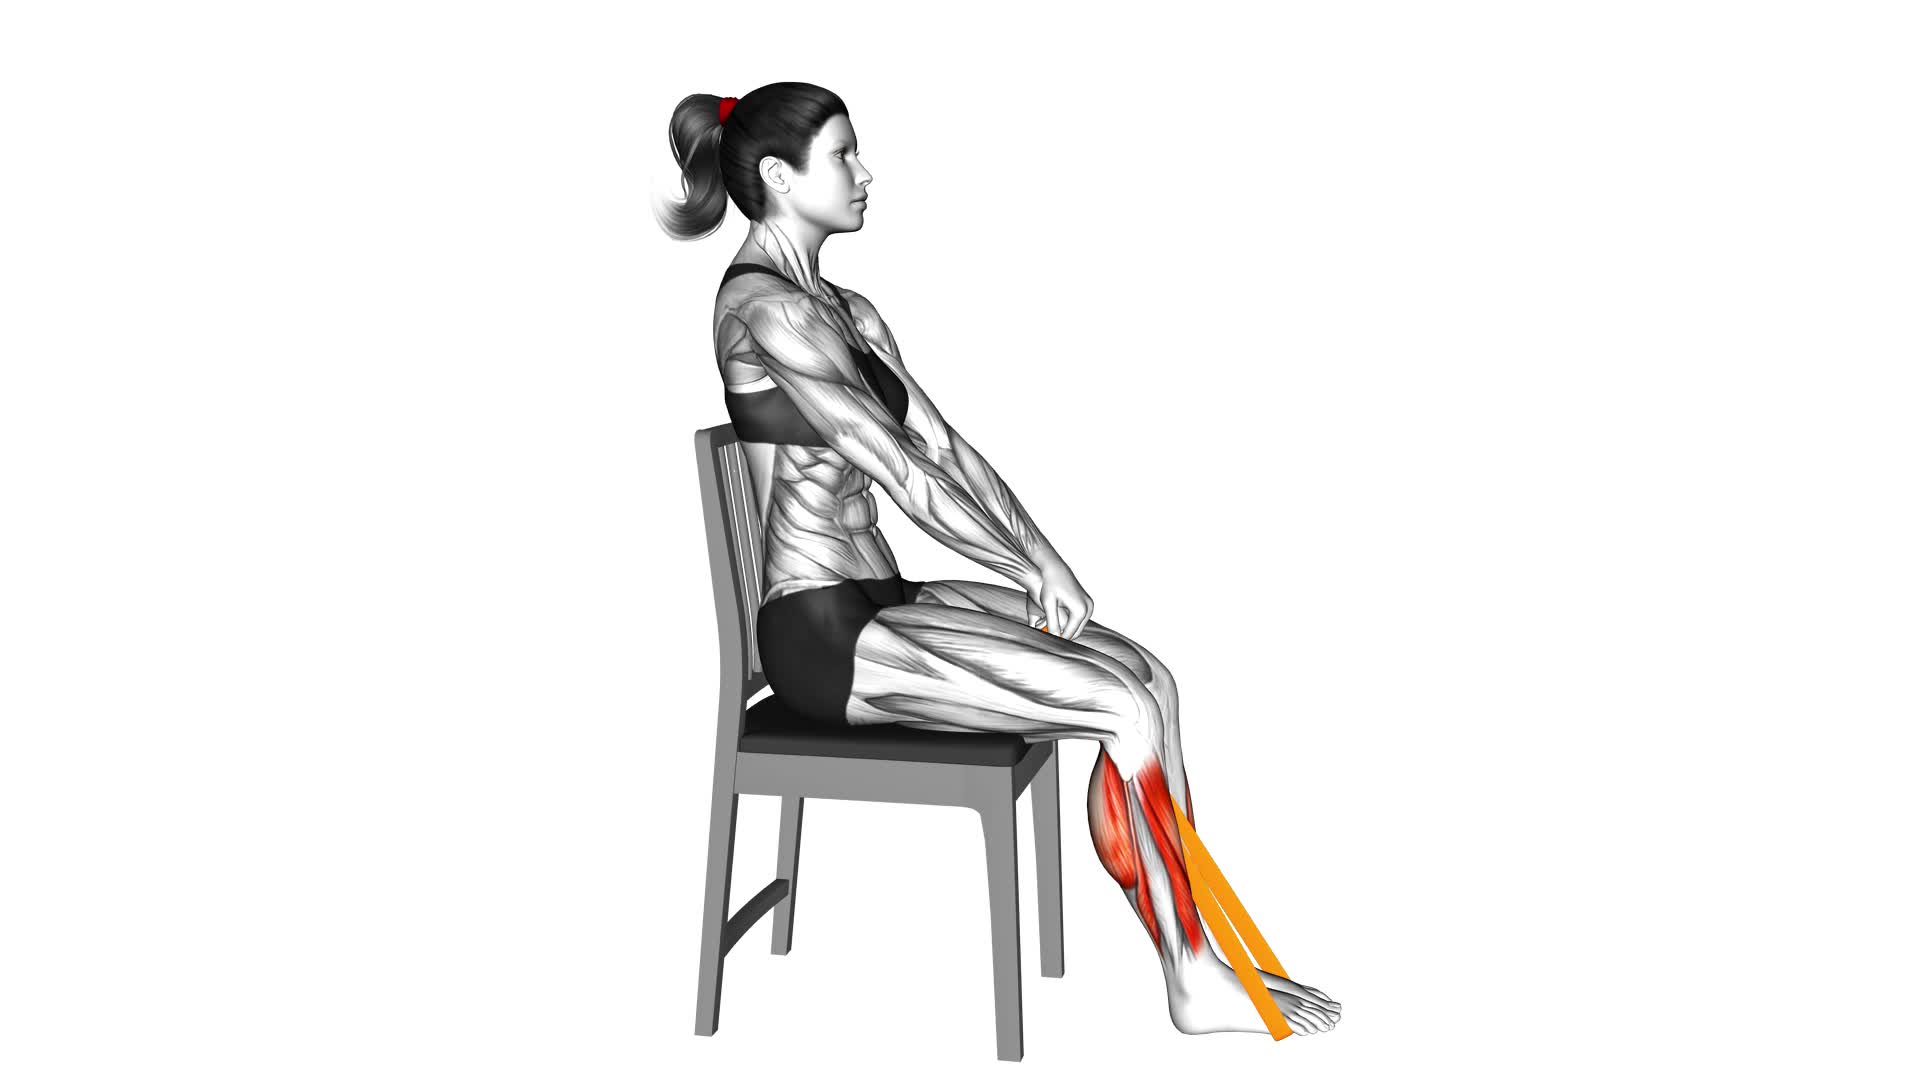 Resistance Band Calf Press Sitting on Chair - Video Exercise Guide & Tips